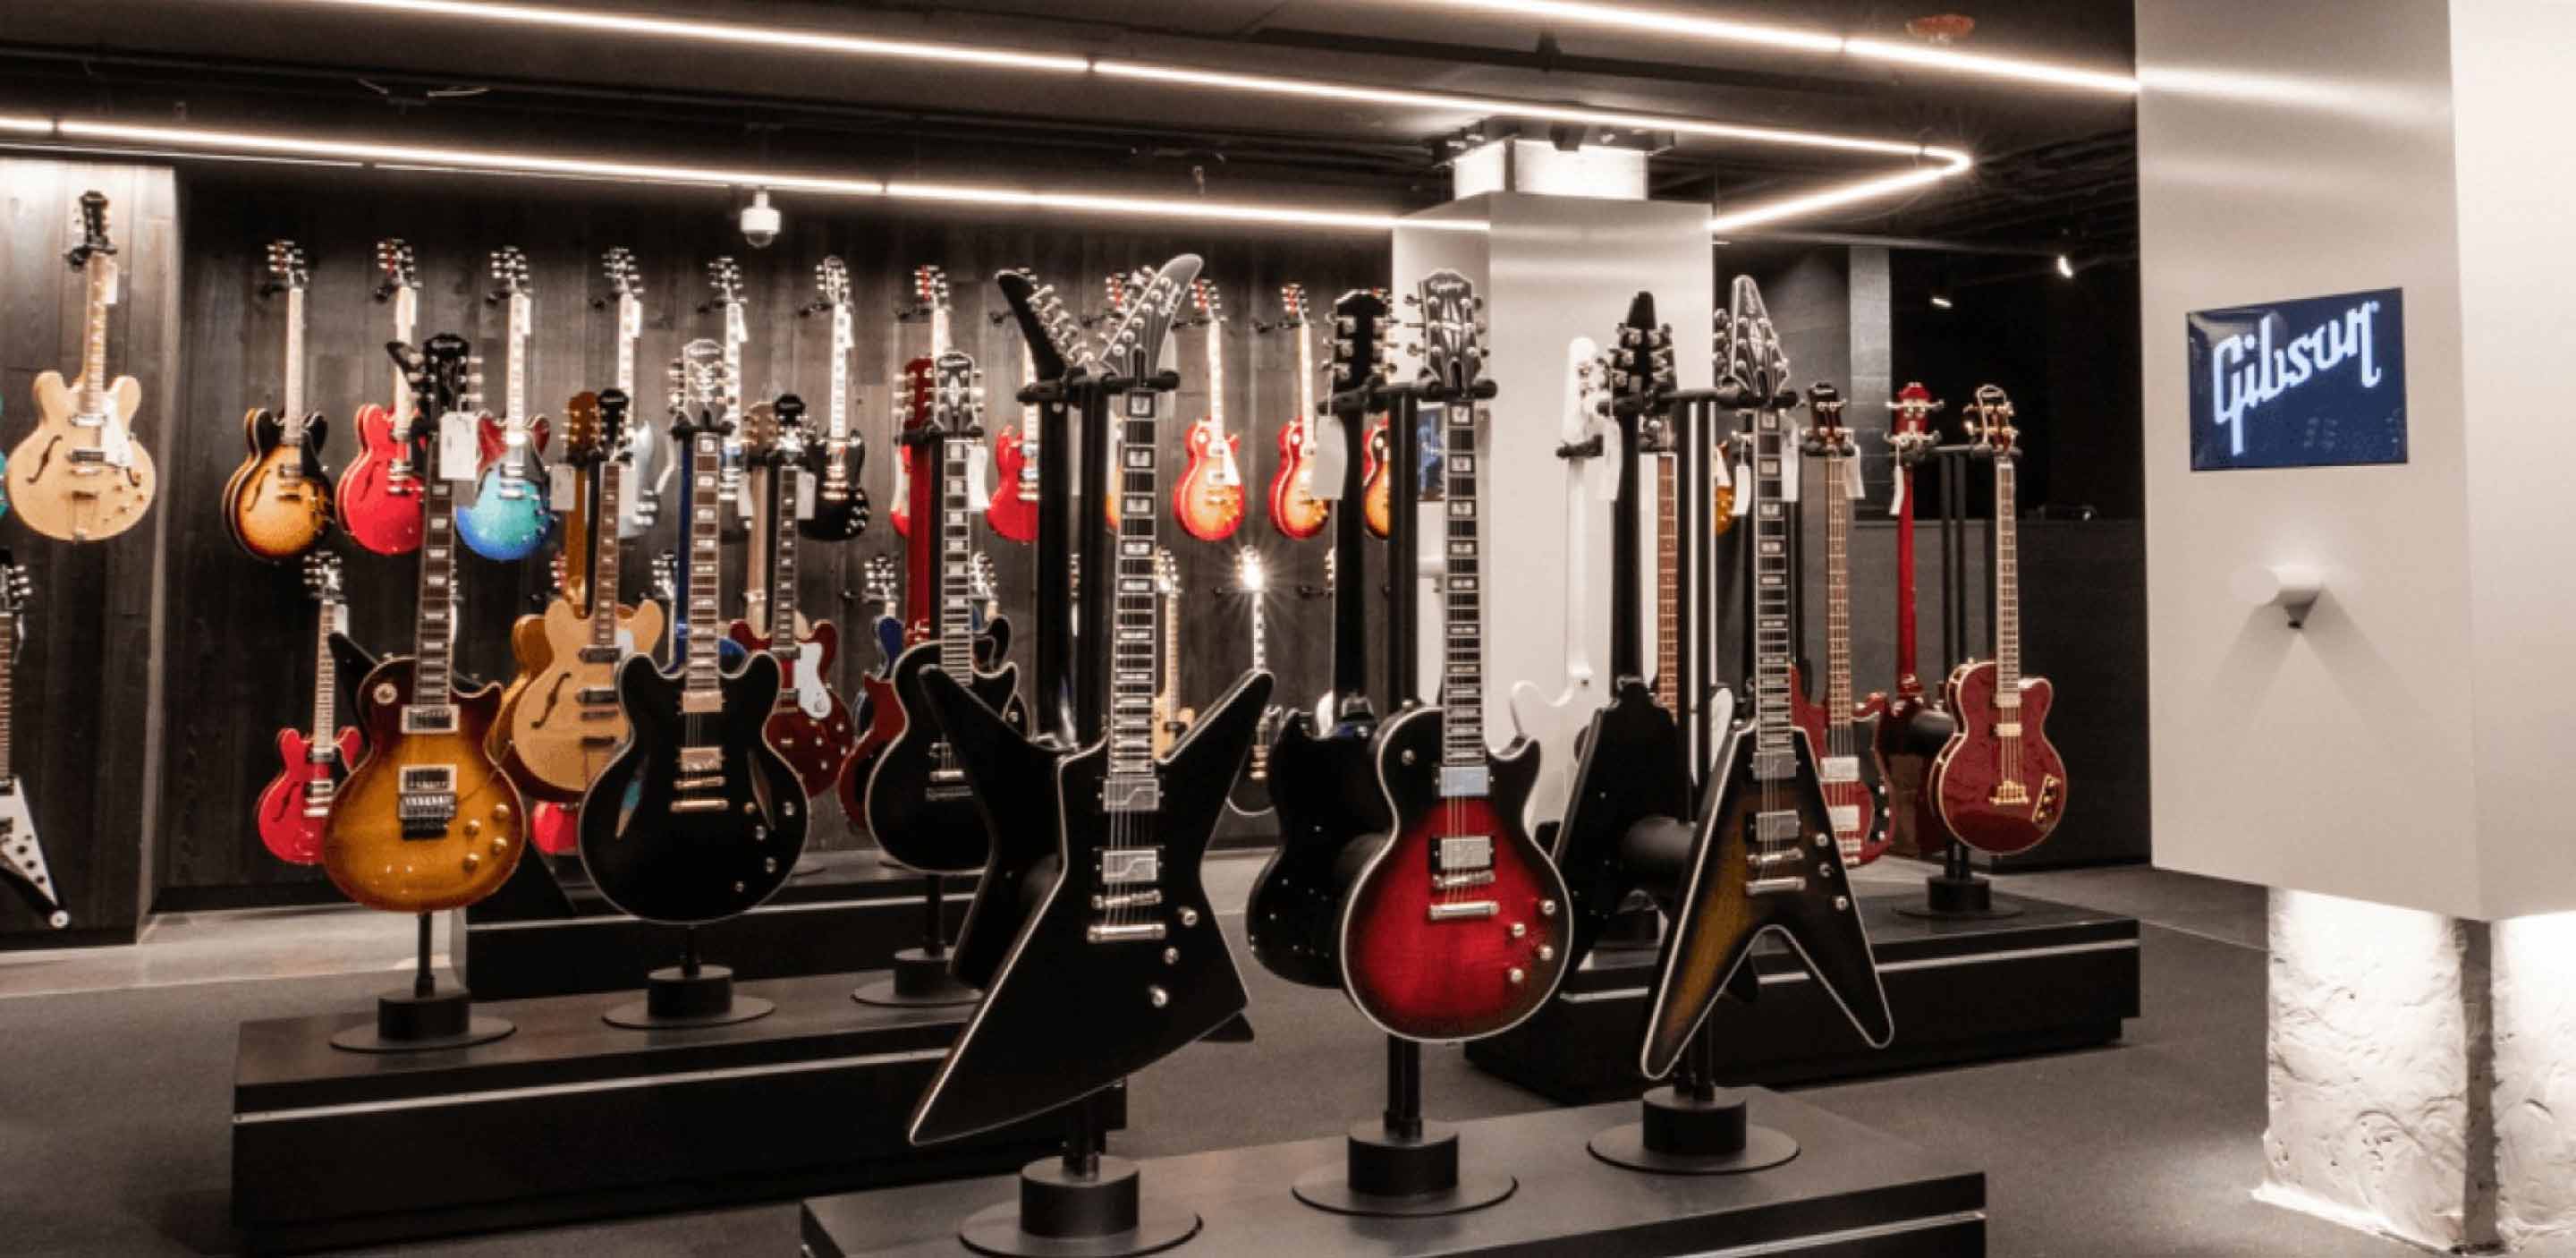 Image of guitars from Gibson brand 